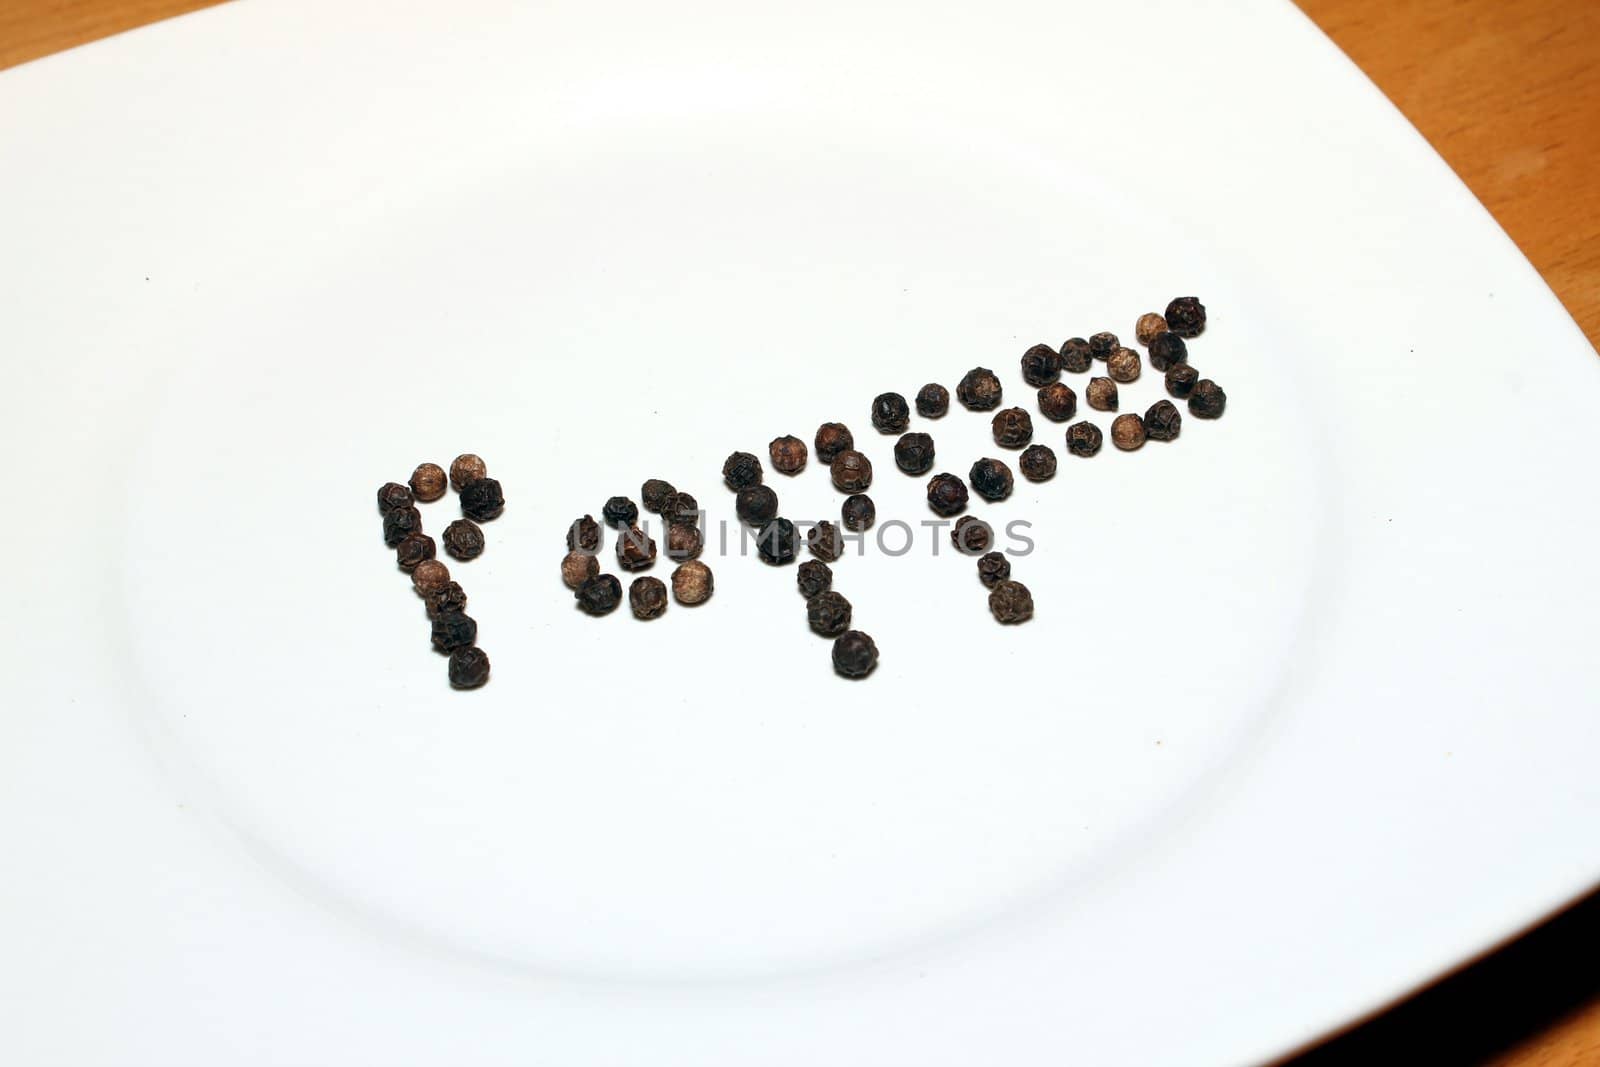 pepper text on a plate by Teka77